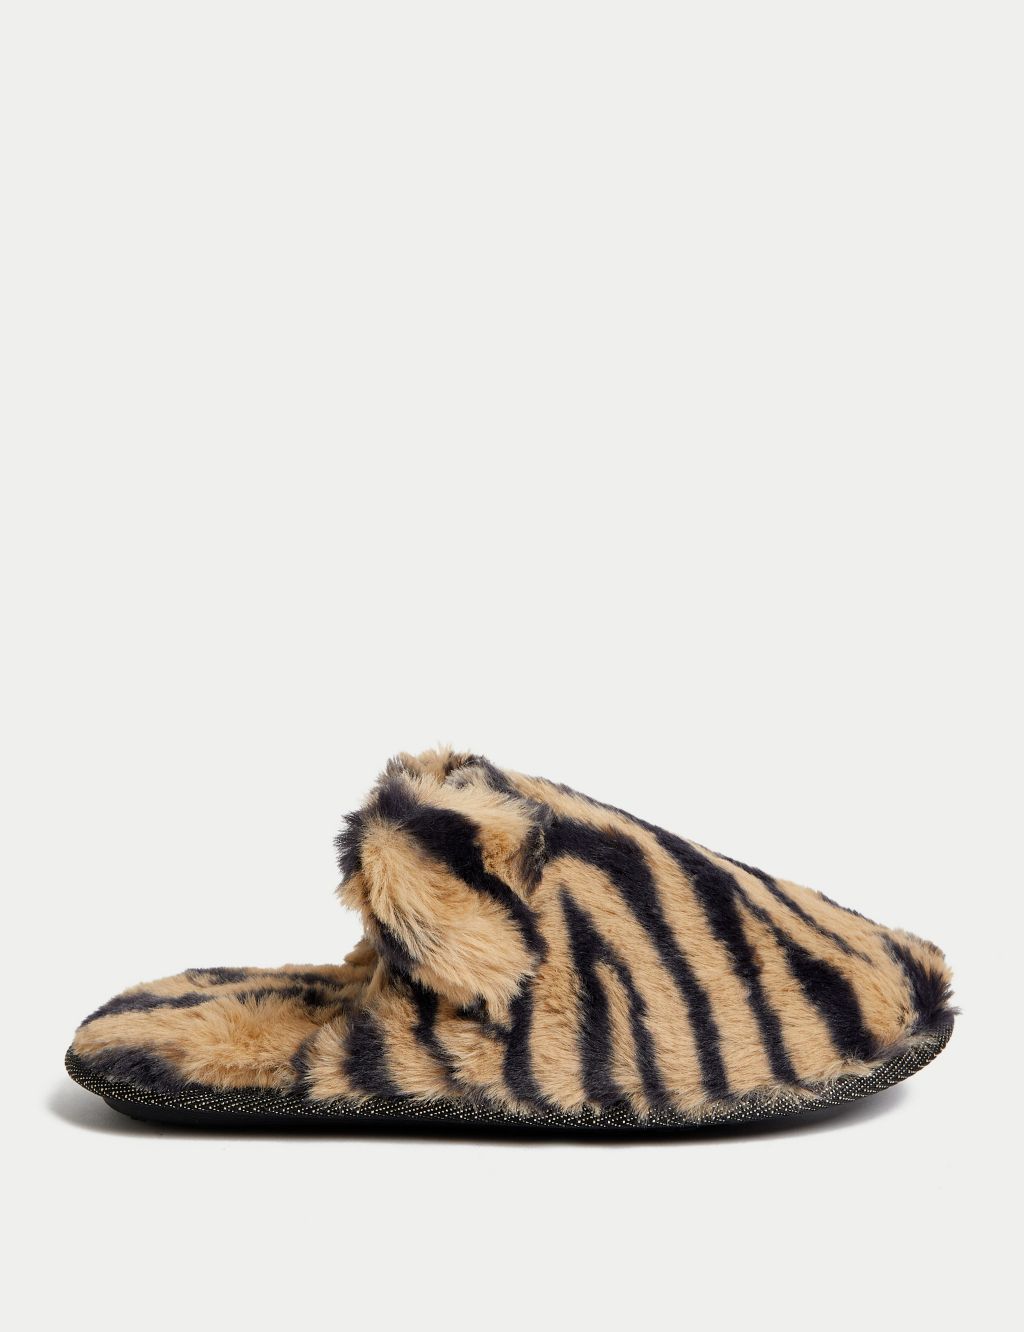 Faux Fur Round Toe Mule Slippers image 1